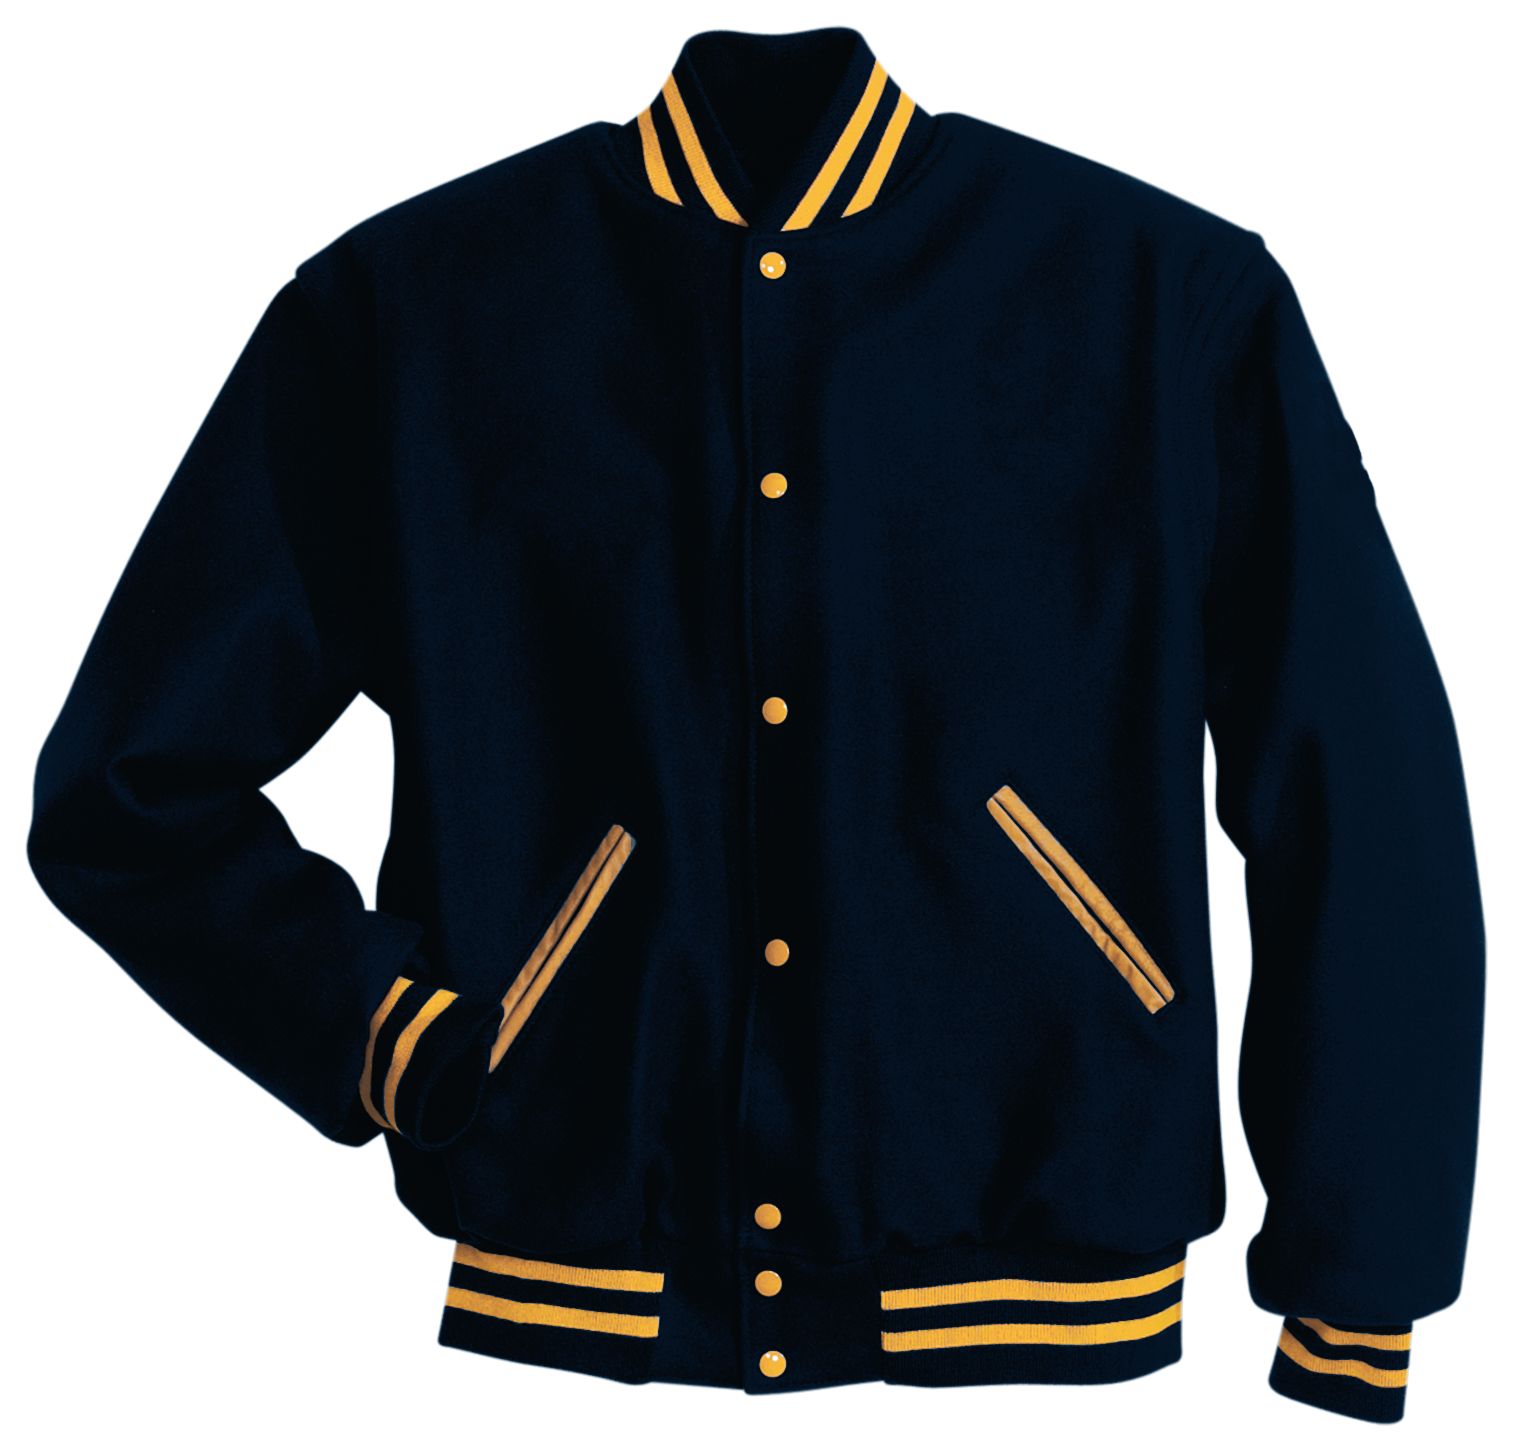 click to view True Navy/Light Gold